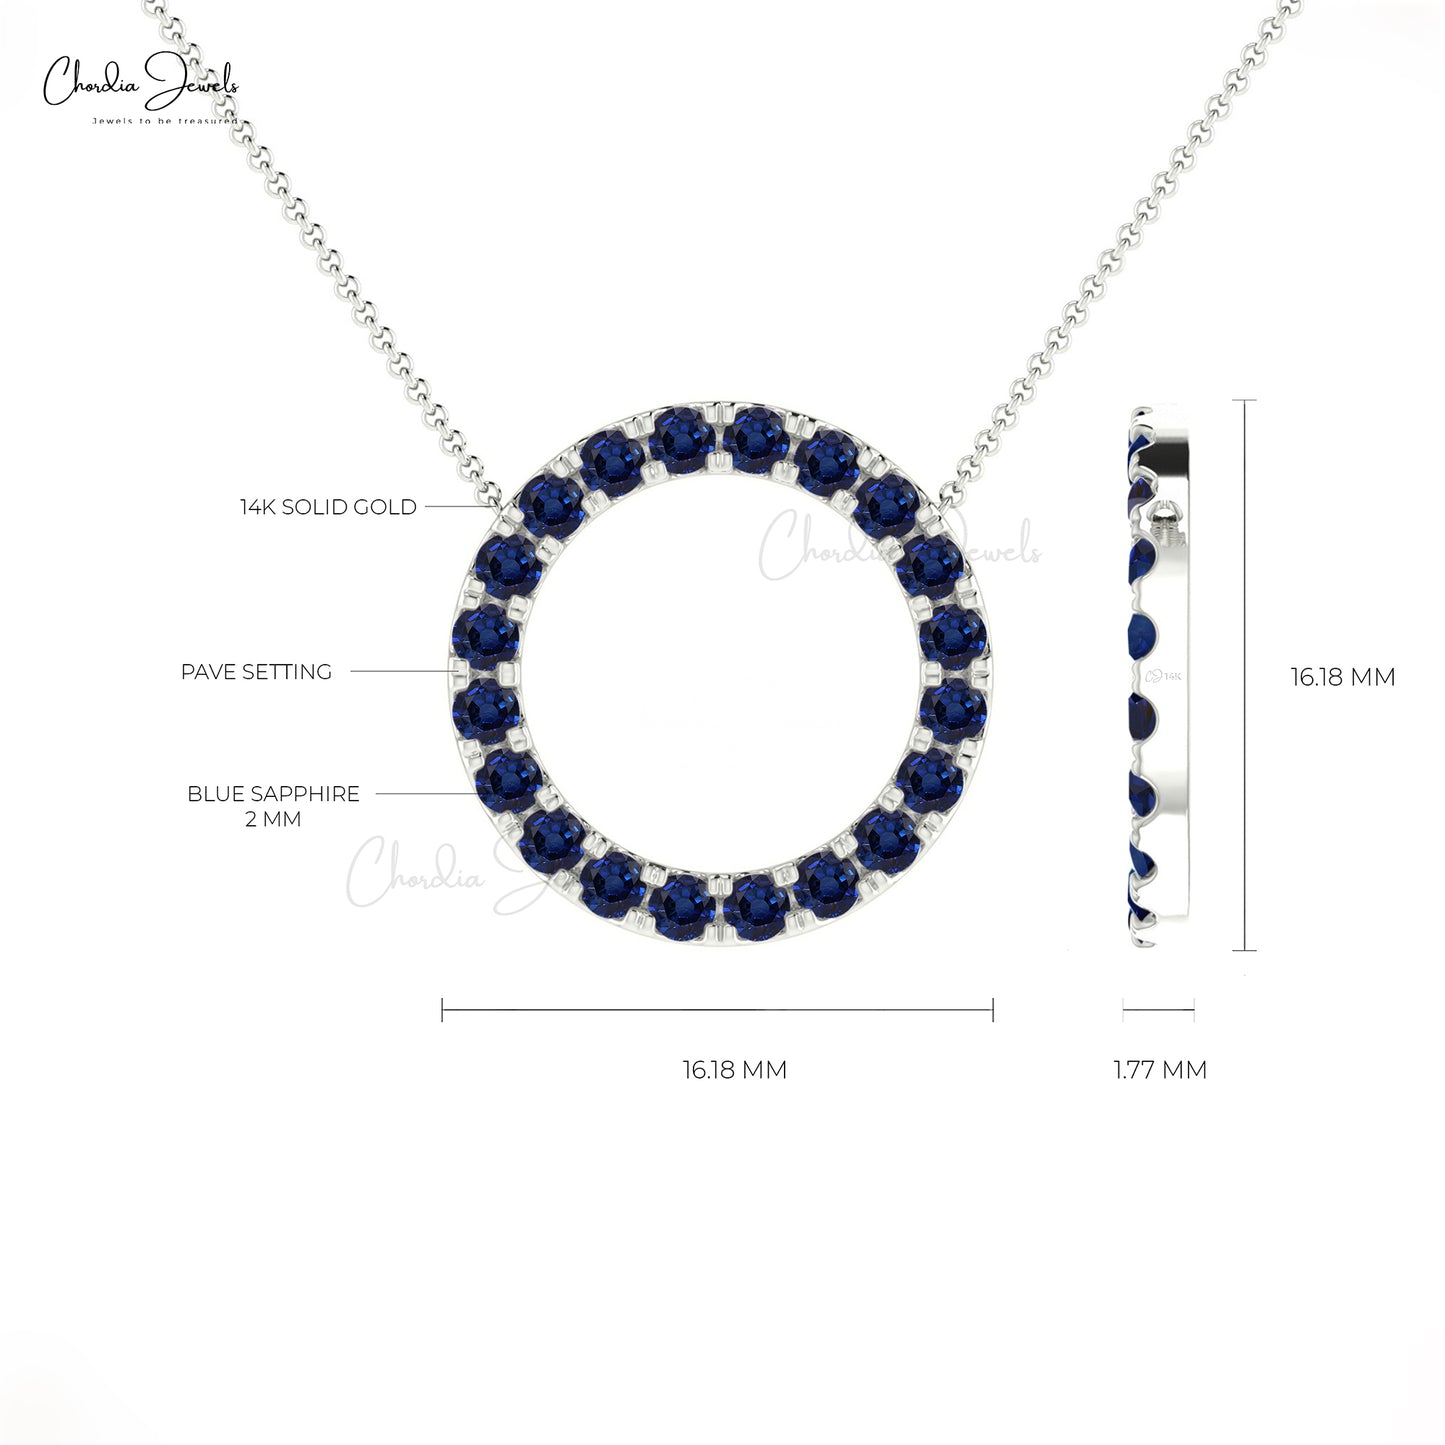 Blue Sapphire 2mm Brilliant Round Cut Natural Gemstone Handmade Necklace 14k Real Gold Hallmarked Jewelry For Her